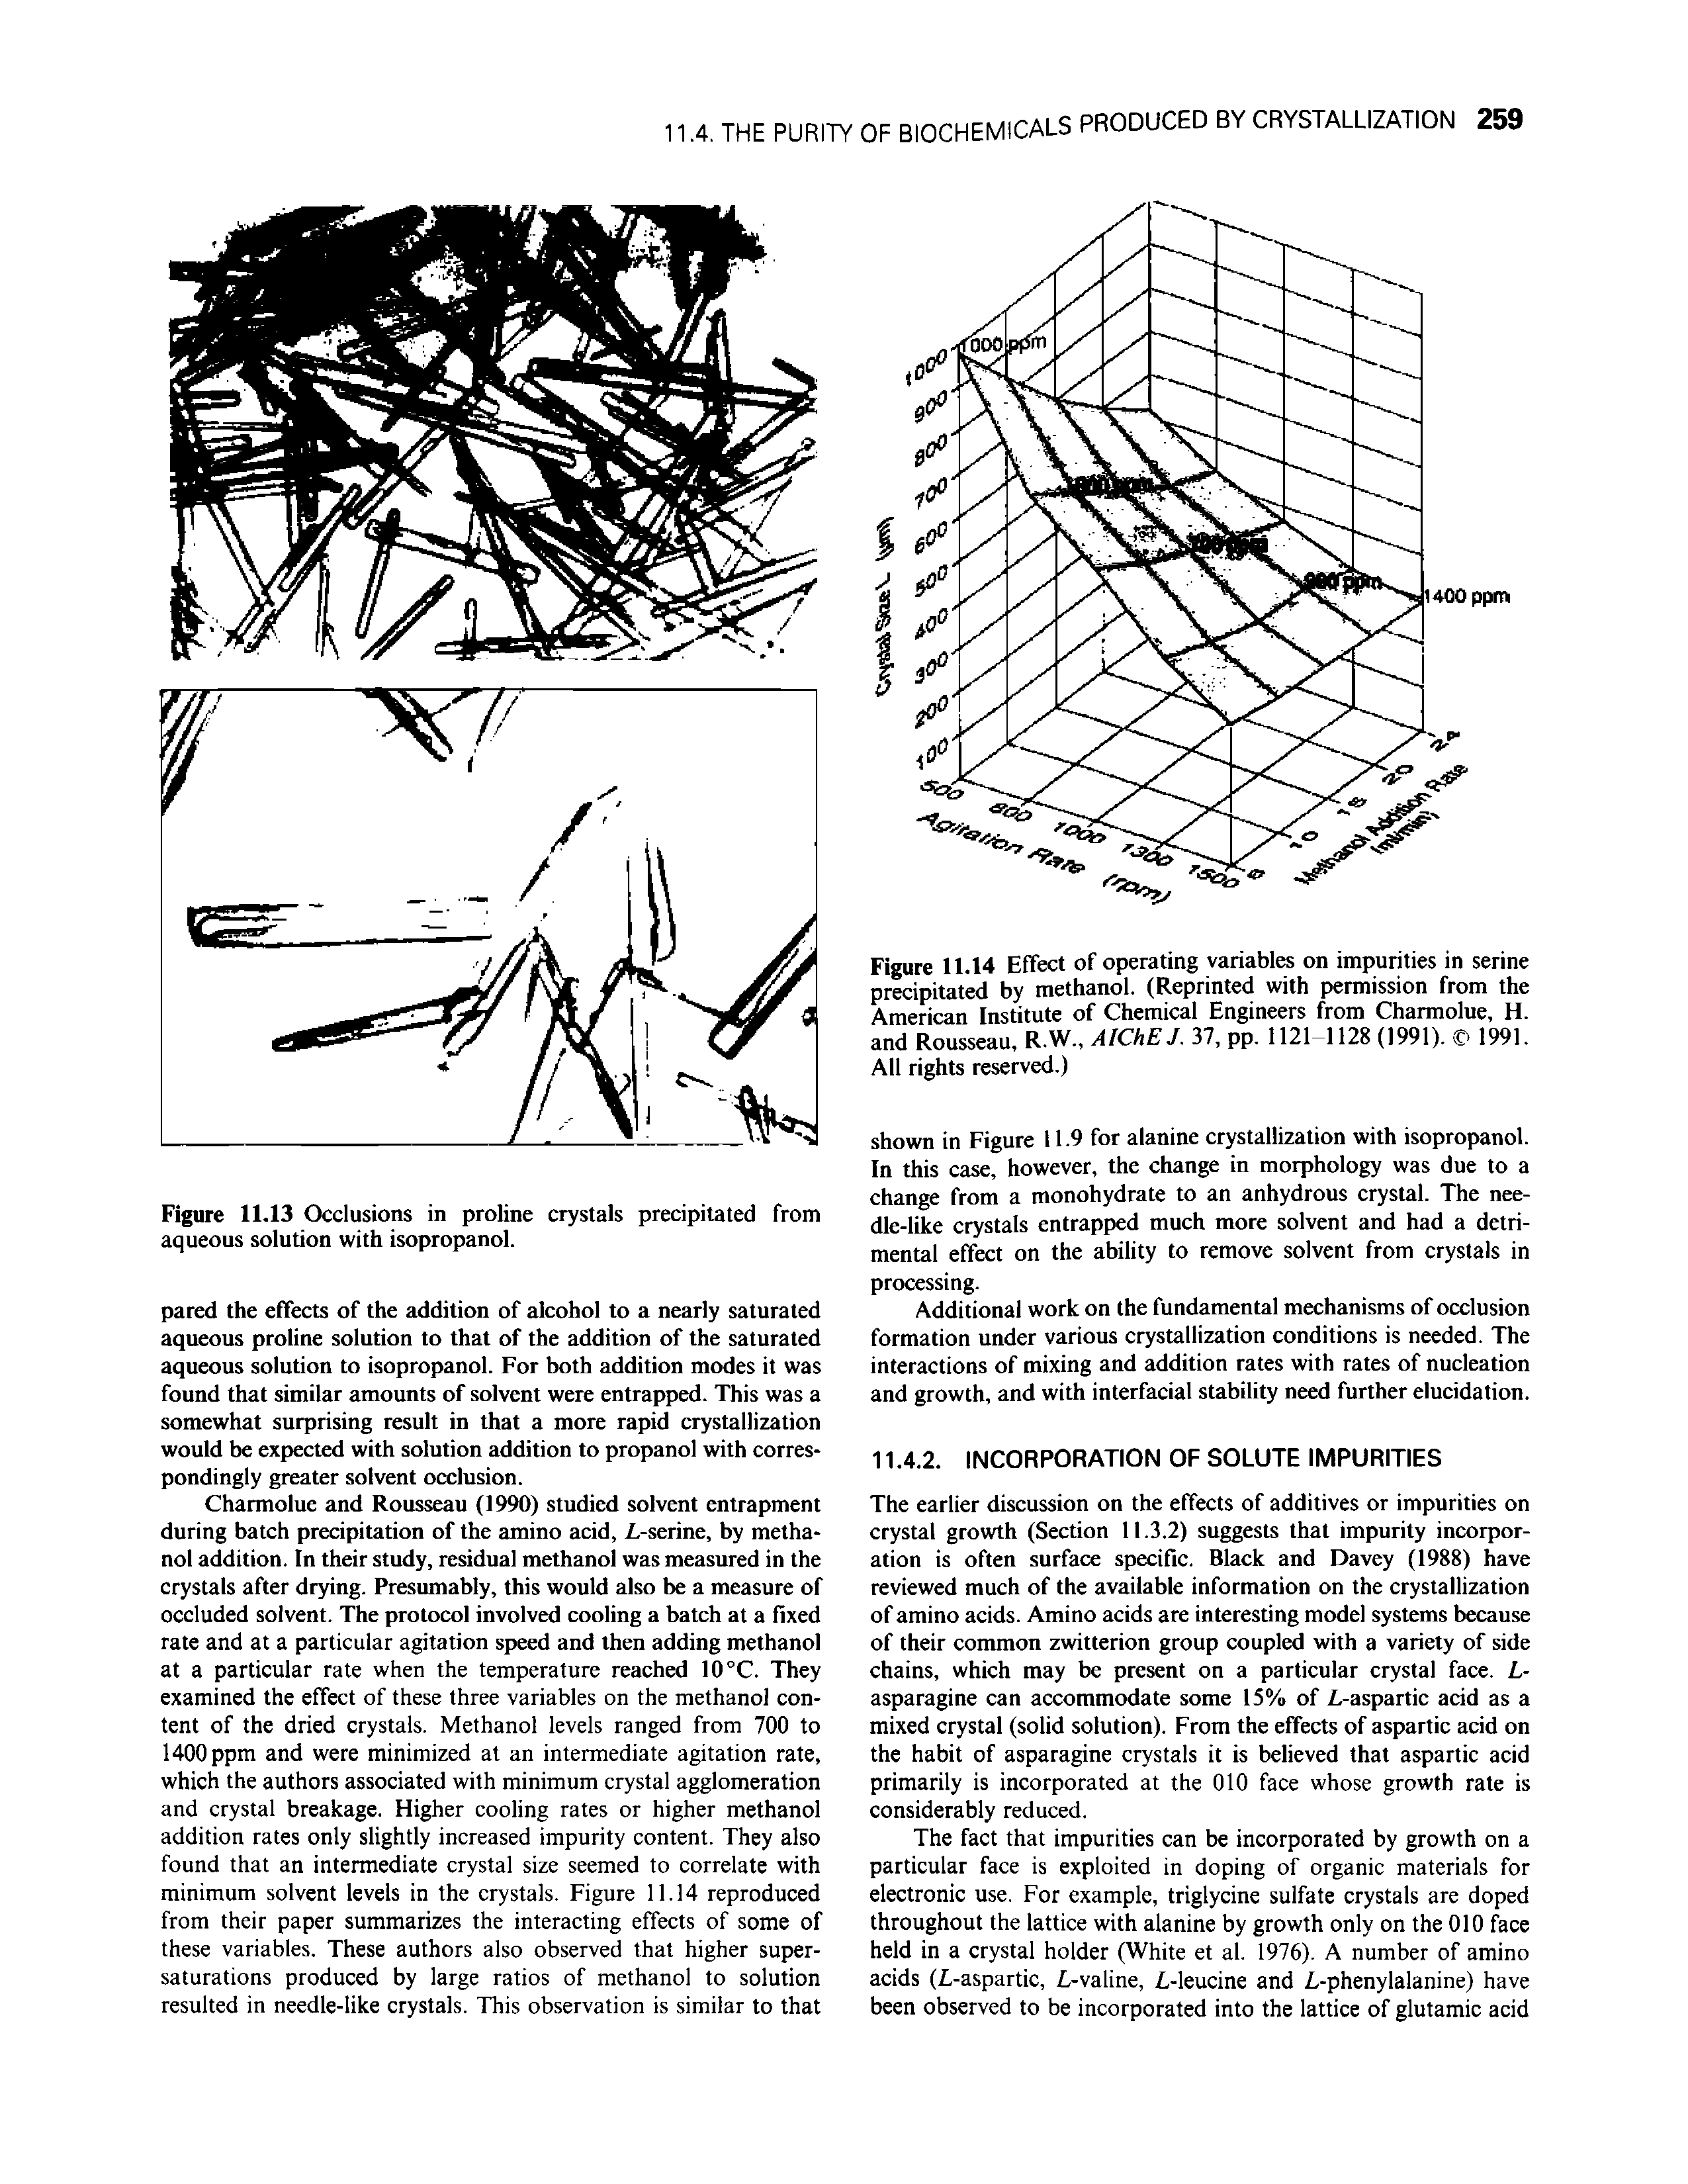 Figure 11.14 Effect of operating variables on impurities in serine precipitated by methanol. (Reprinted with permission from the American Institute of Chemical Engineers from Charmolue, H. and Rousseau, R.W., AIChE J.Yl, pp. 1121 1128 (1991). 1991. All rights reserved.)...